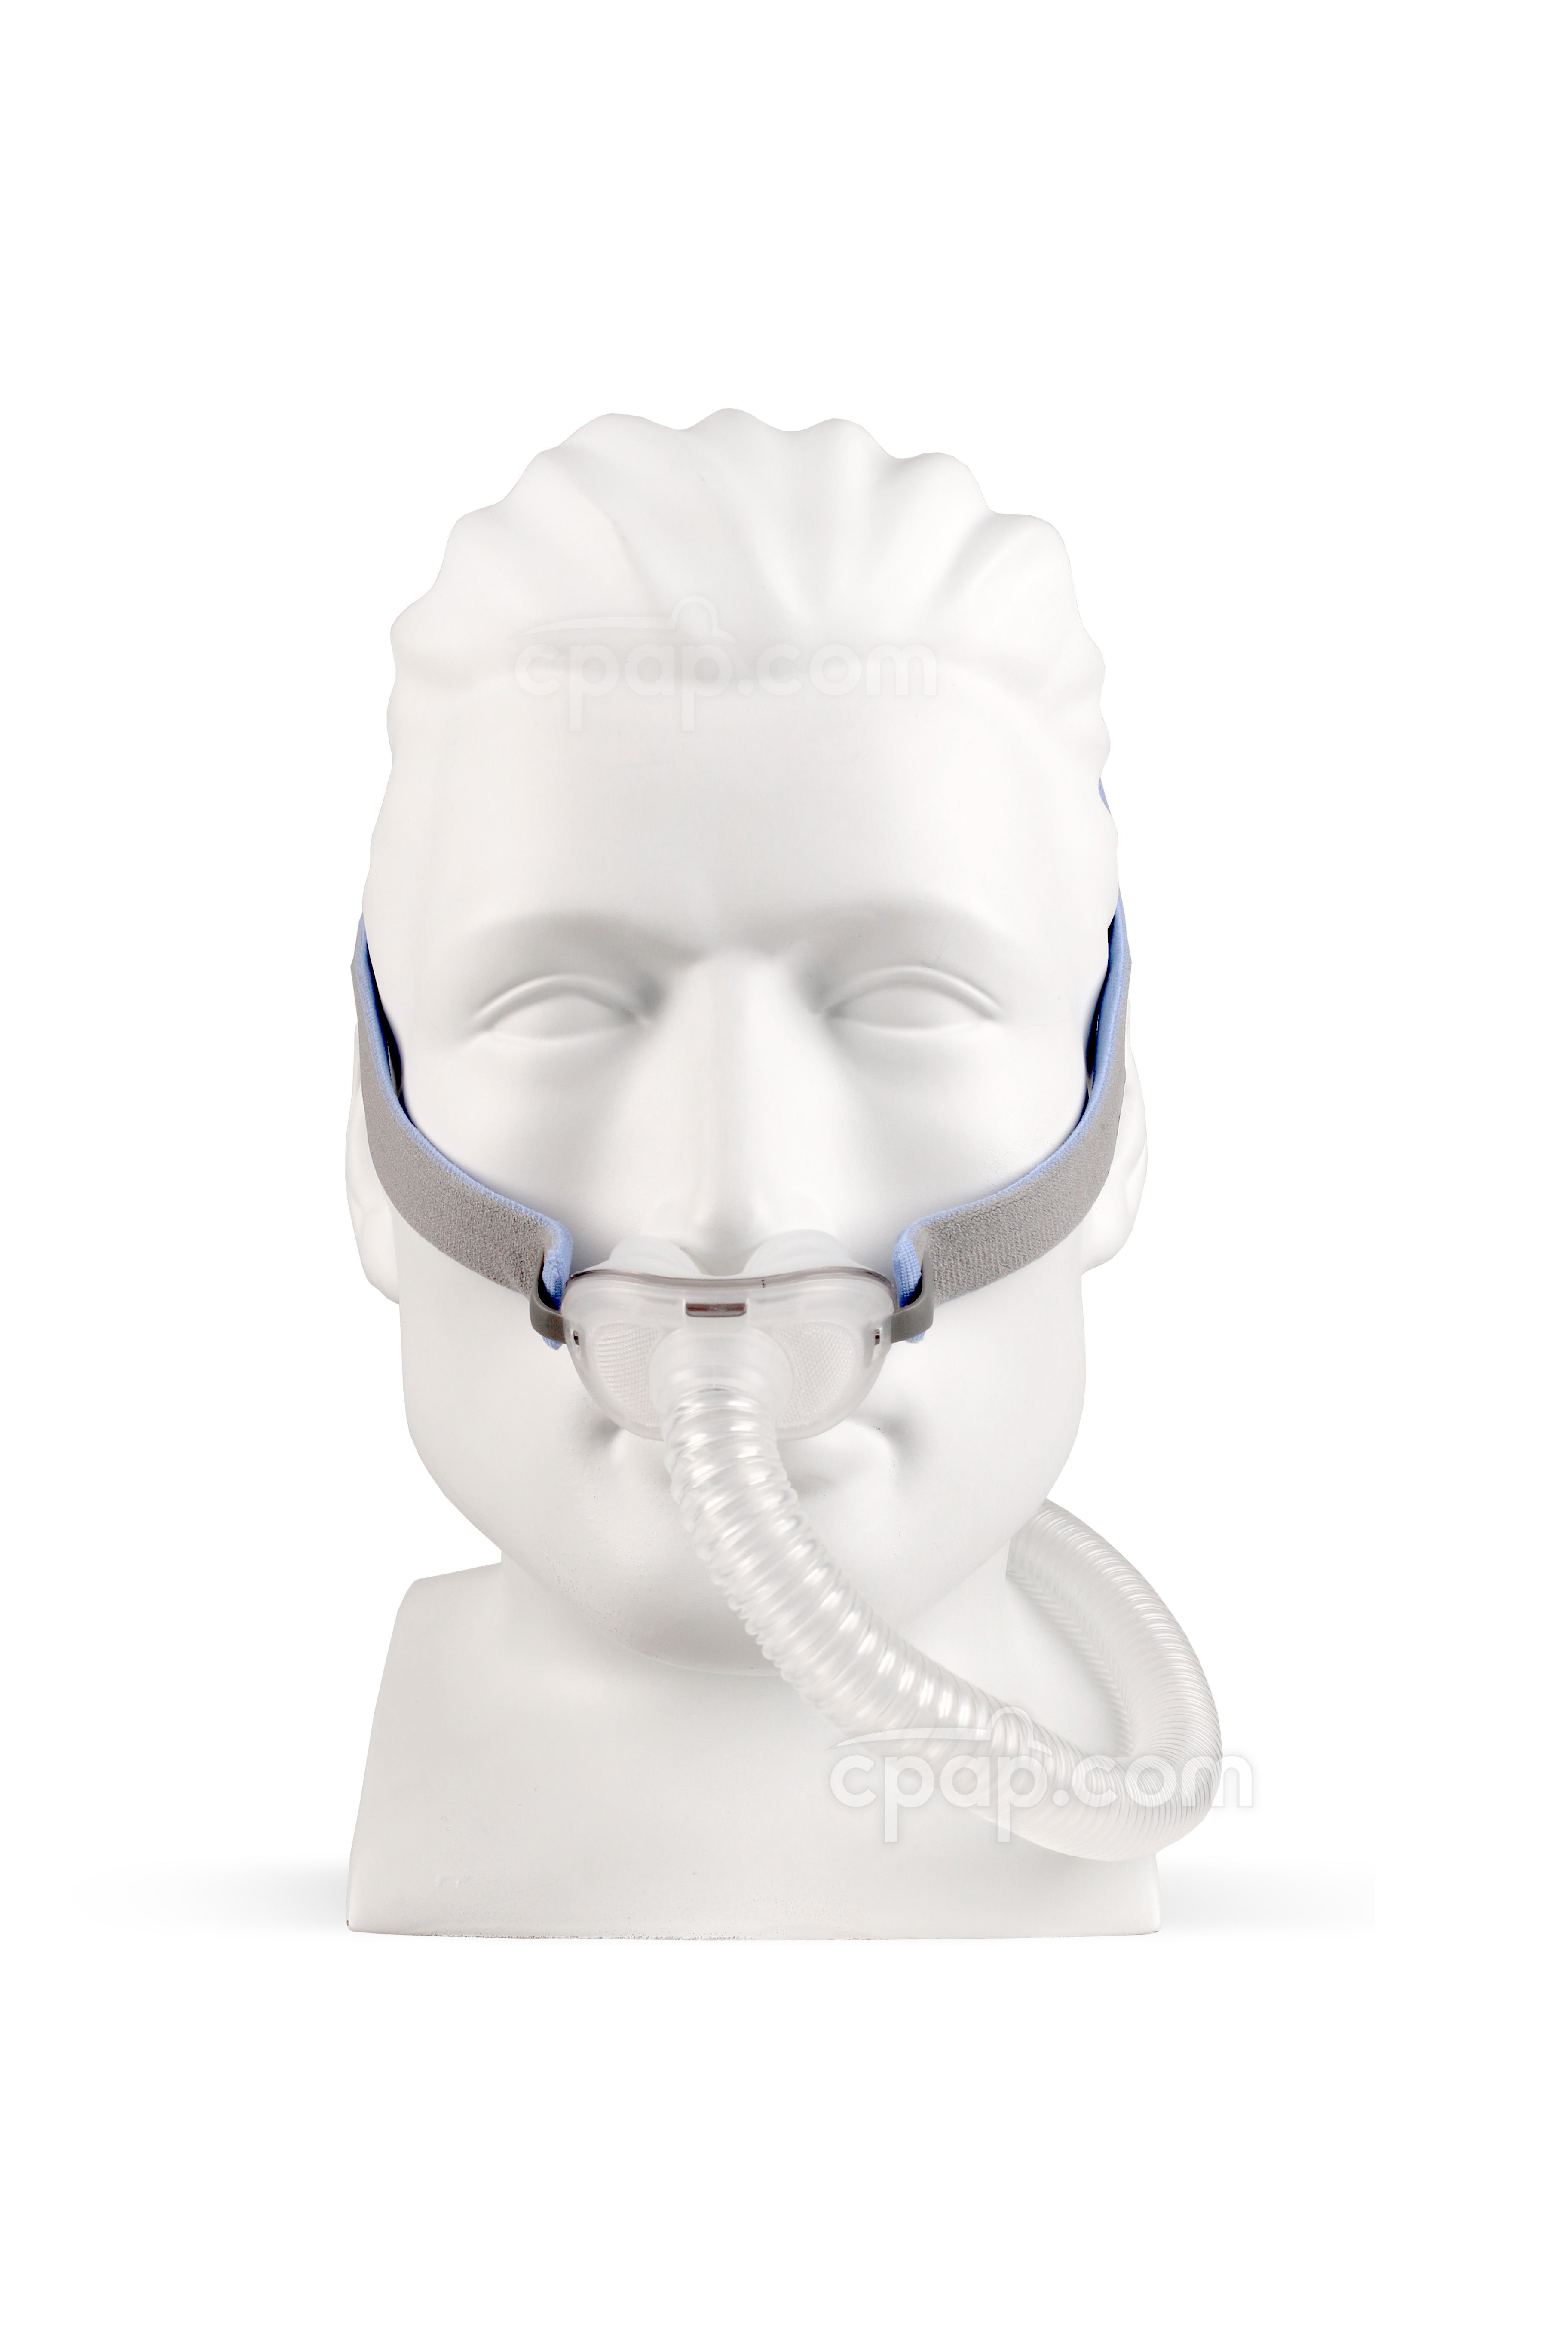 Philips Respironics Nuance Fabric Nasal Pillow CPAP BiPAP Mask With ...